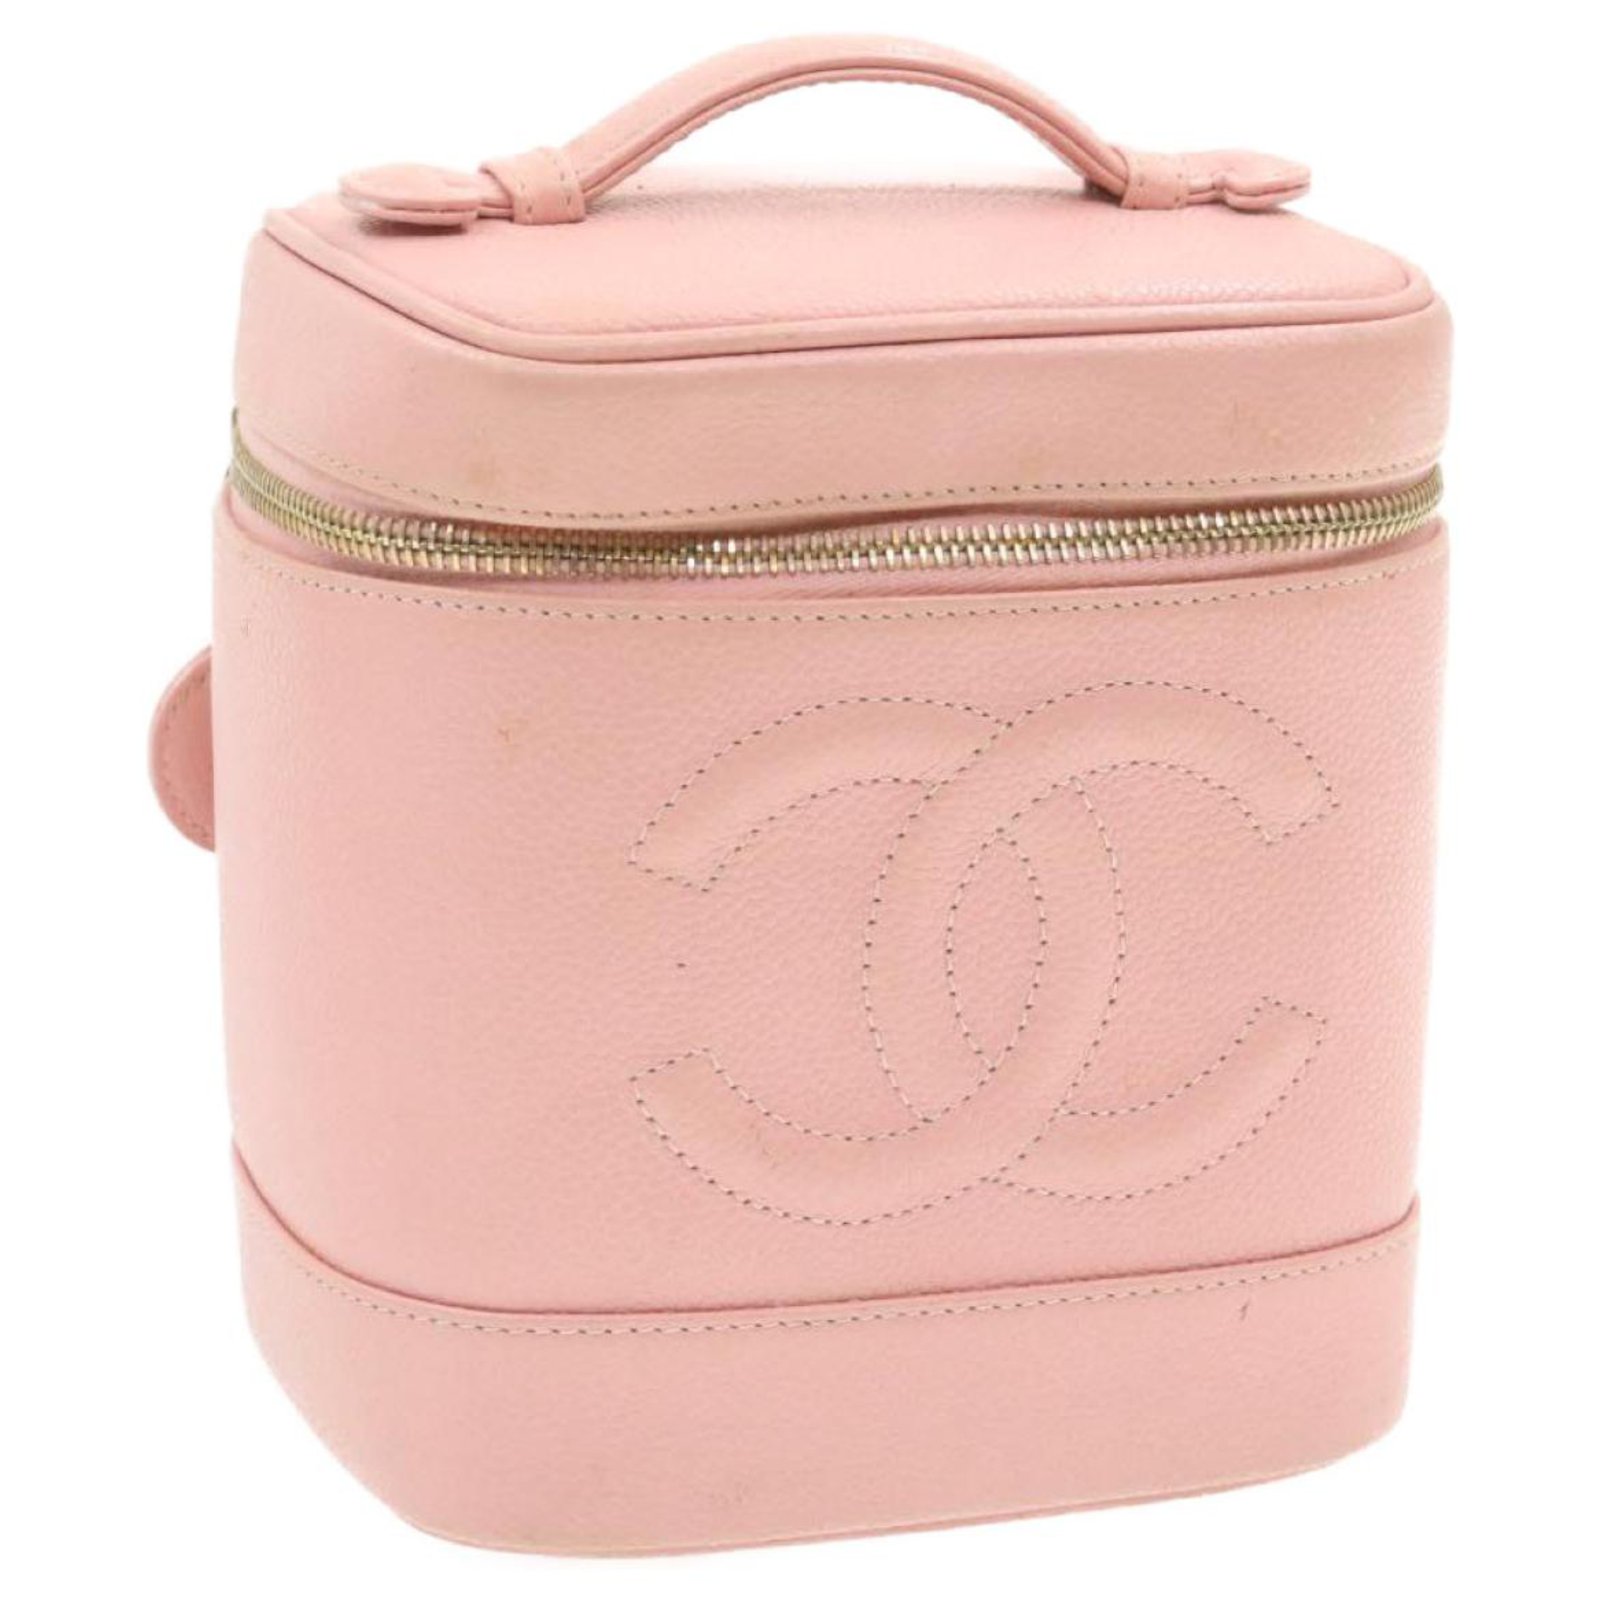 CHANEL Caviar Skin Leather Vanity Cosmetic Pouch Bag Pink Auth